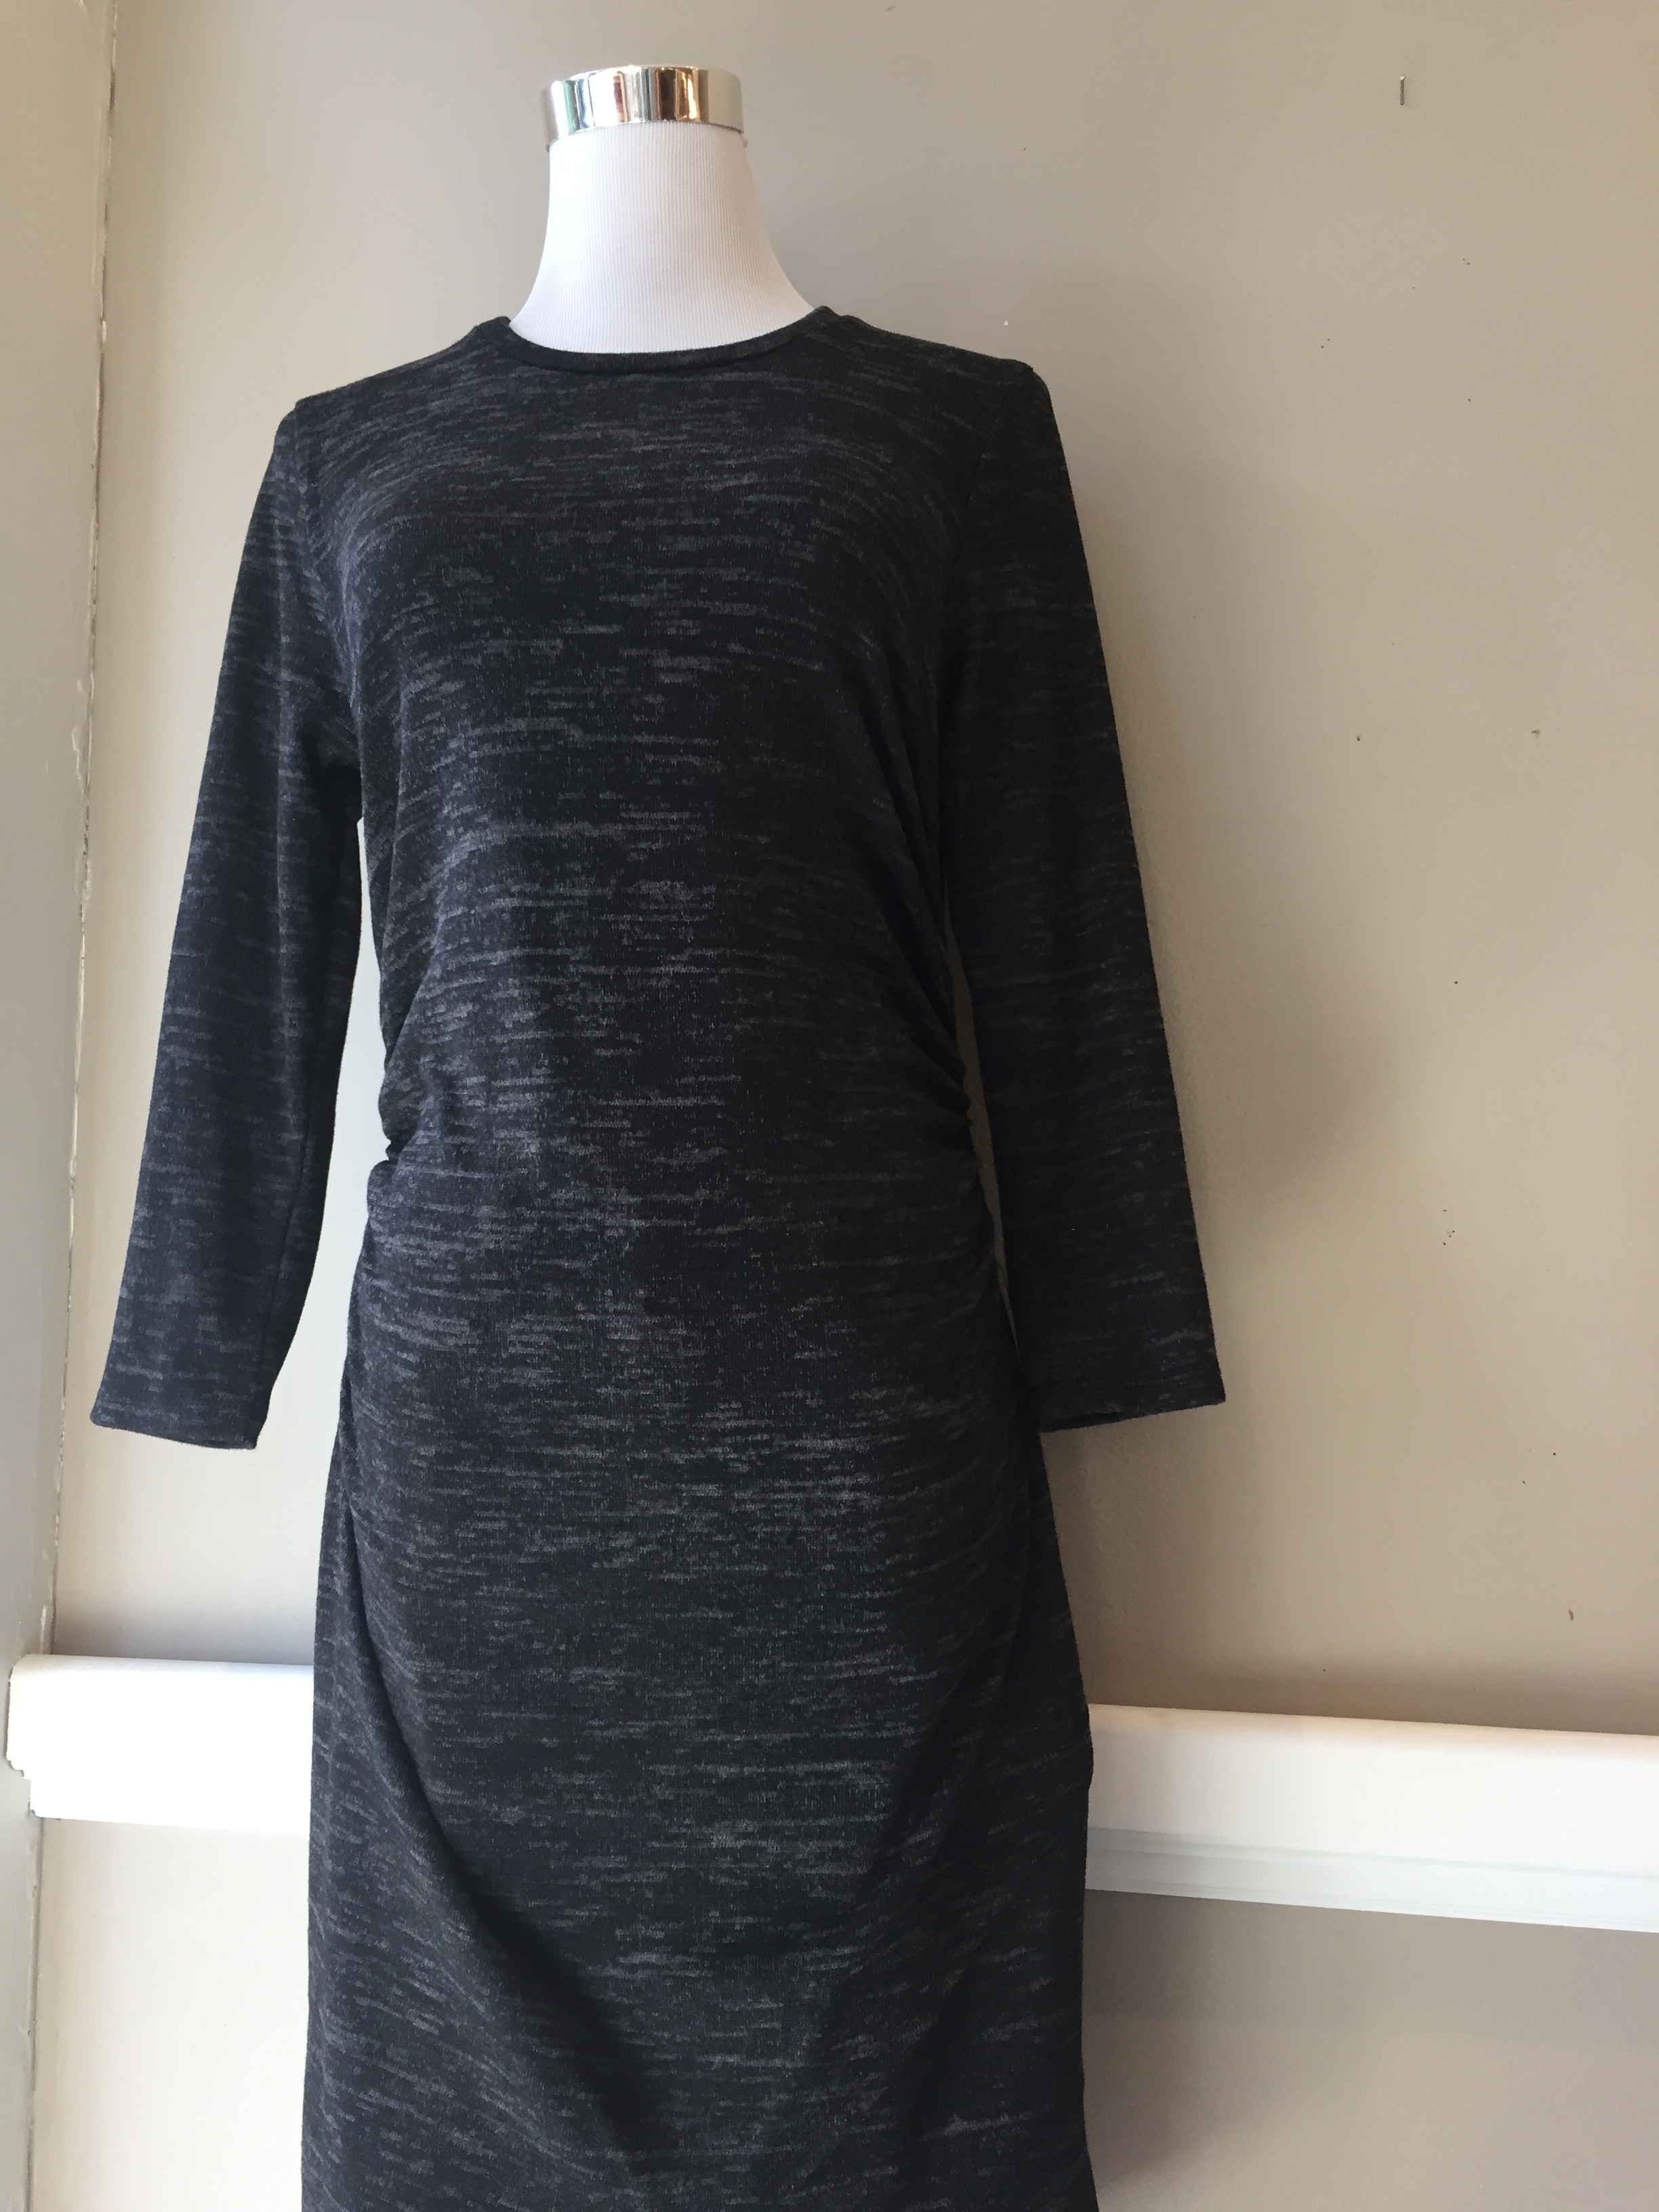 Dress with tulip detail ($35, also in heather grey)